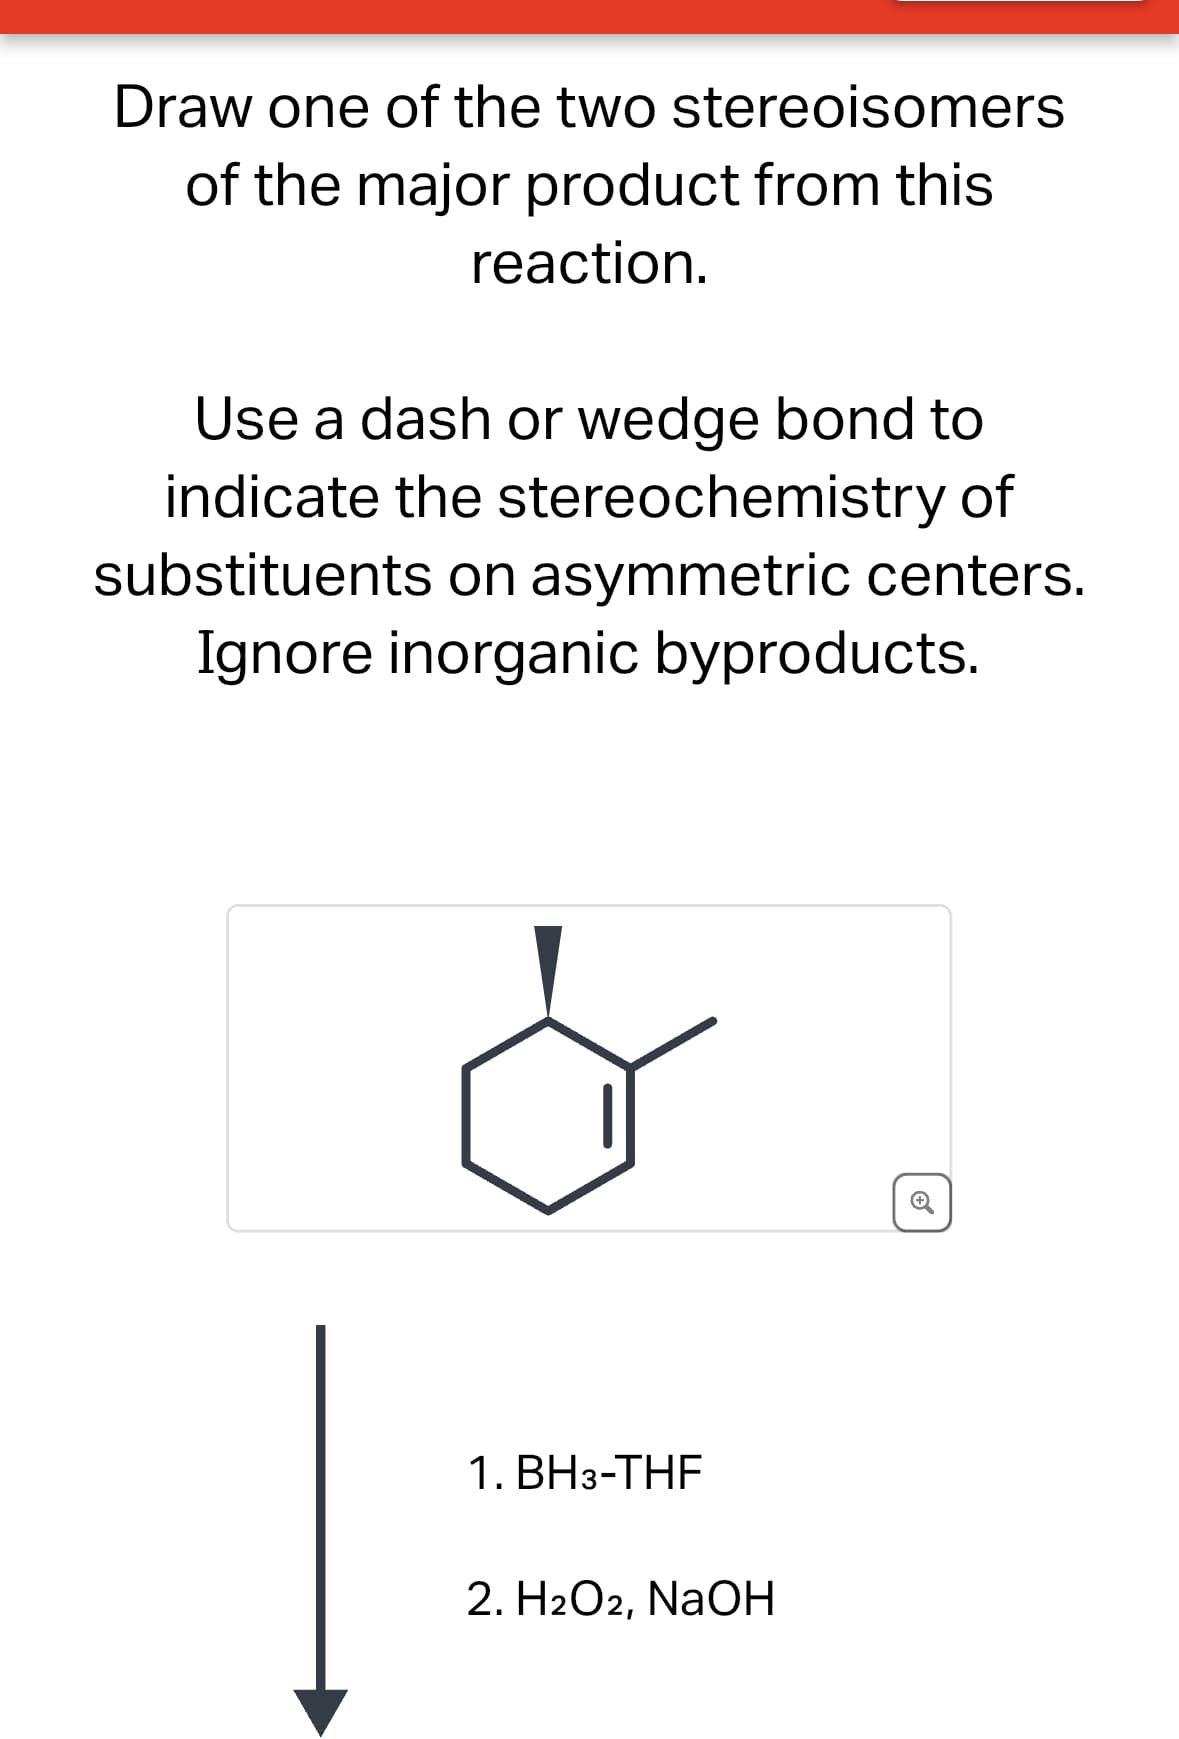 Draw one of the two stereoisomers
of the major product from this
reaction.
Use a dash or wedge bond to
indicate the stereochemistry of
substituents on asymmetric centers.
Ignore inorganic byproducts.
C
1. BH3-THF
2. H2O2, NaOH